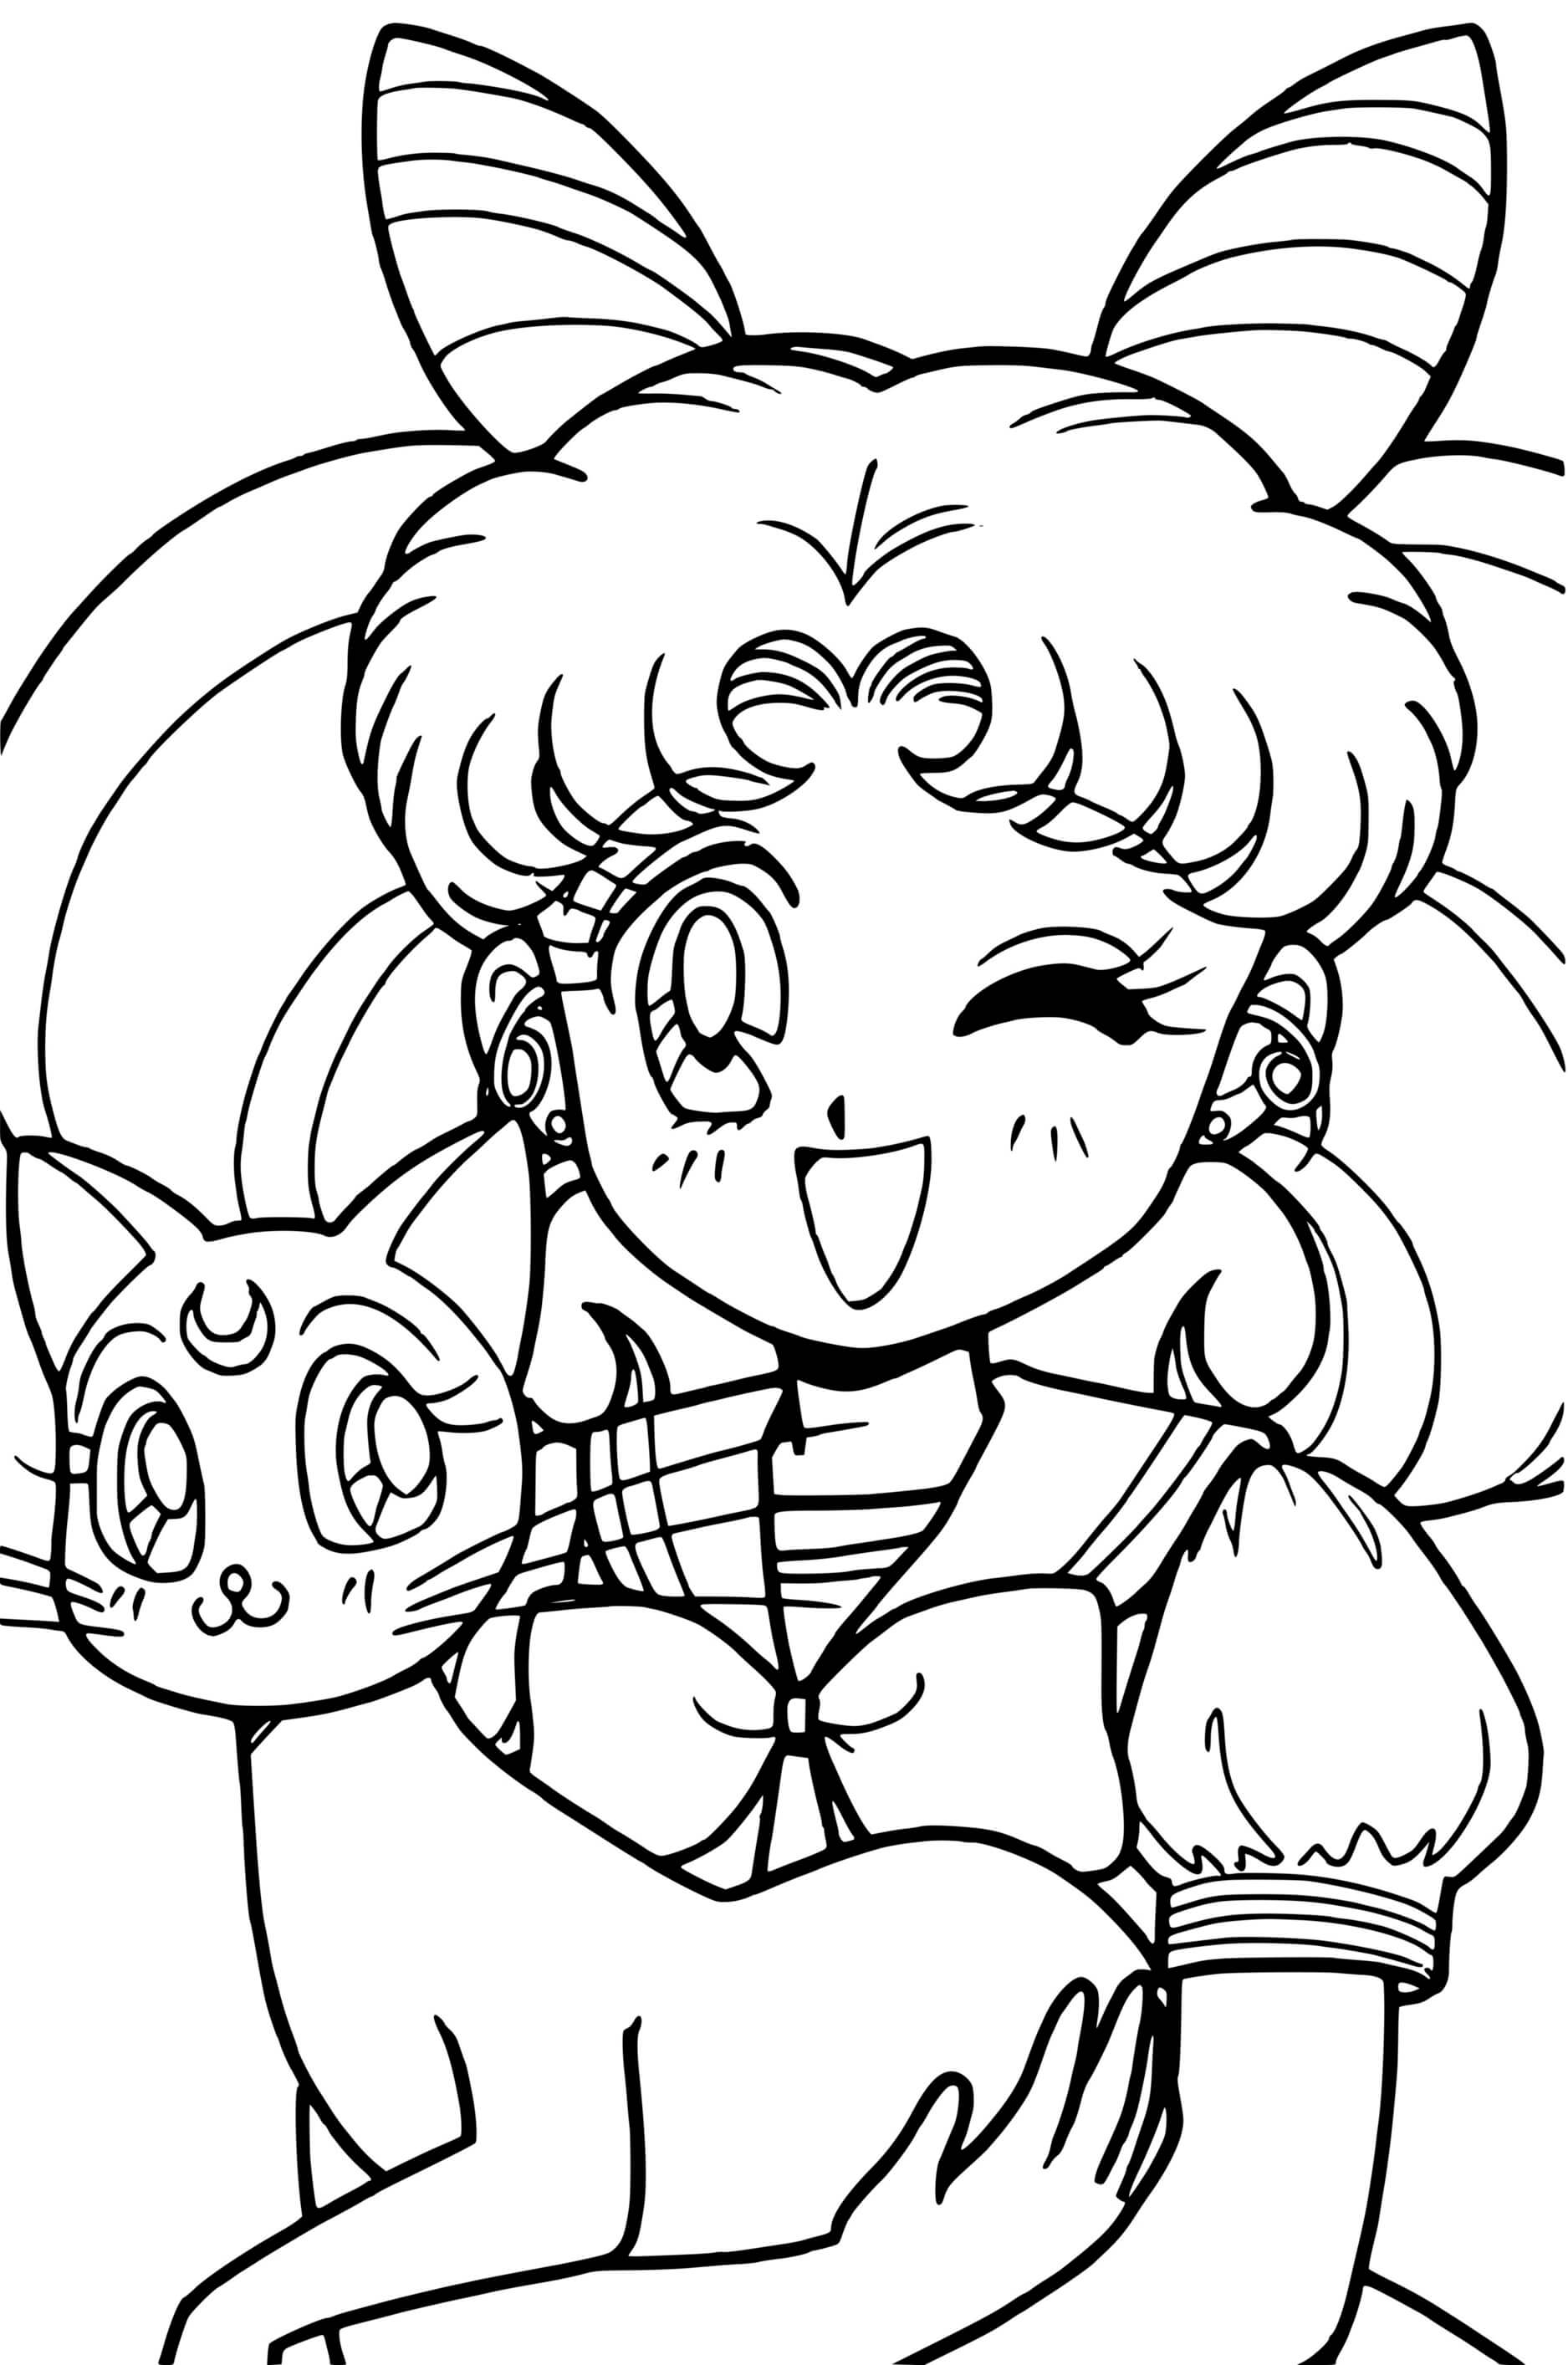 Sailor Moon And Cat Coloring Page